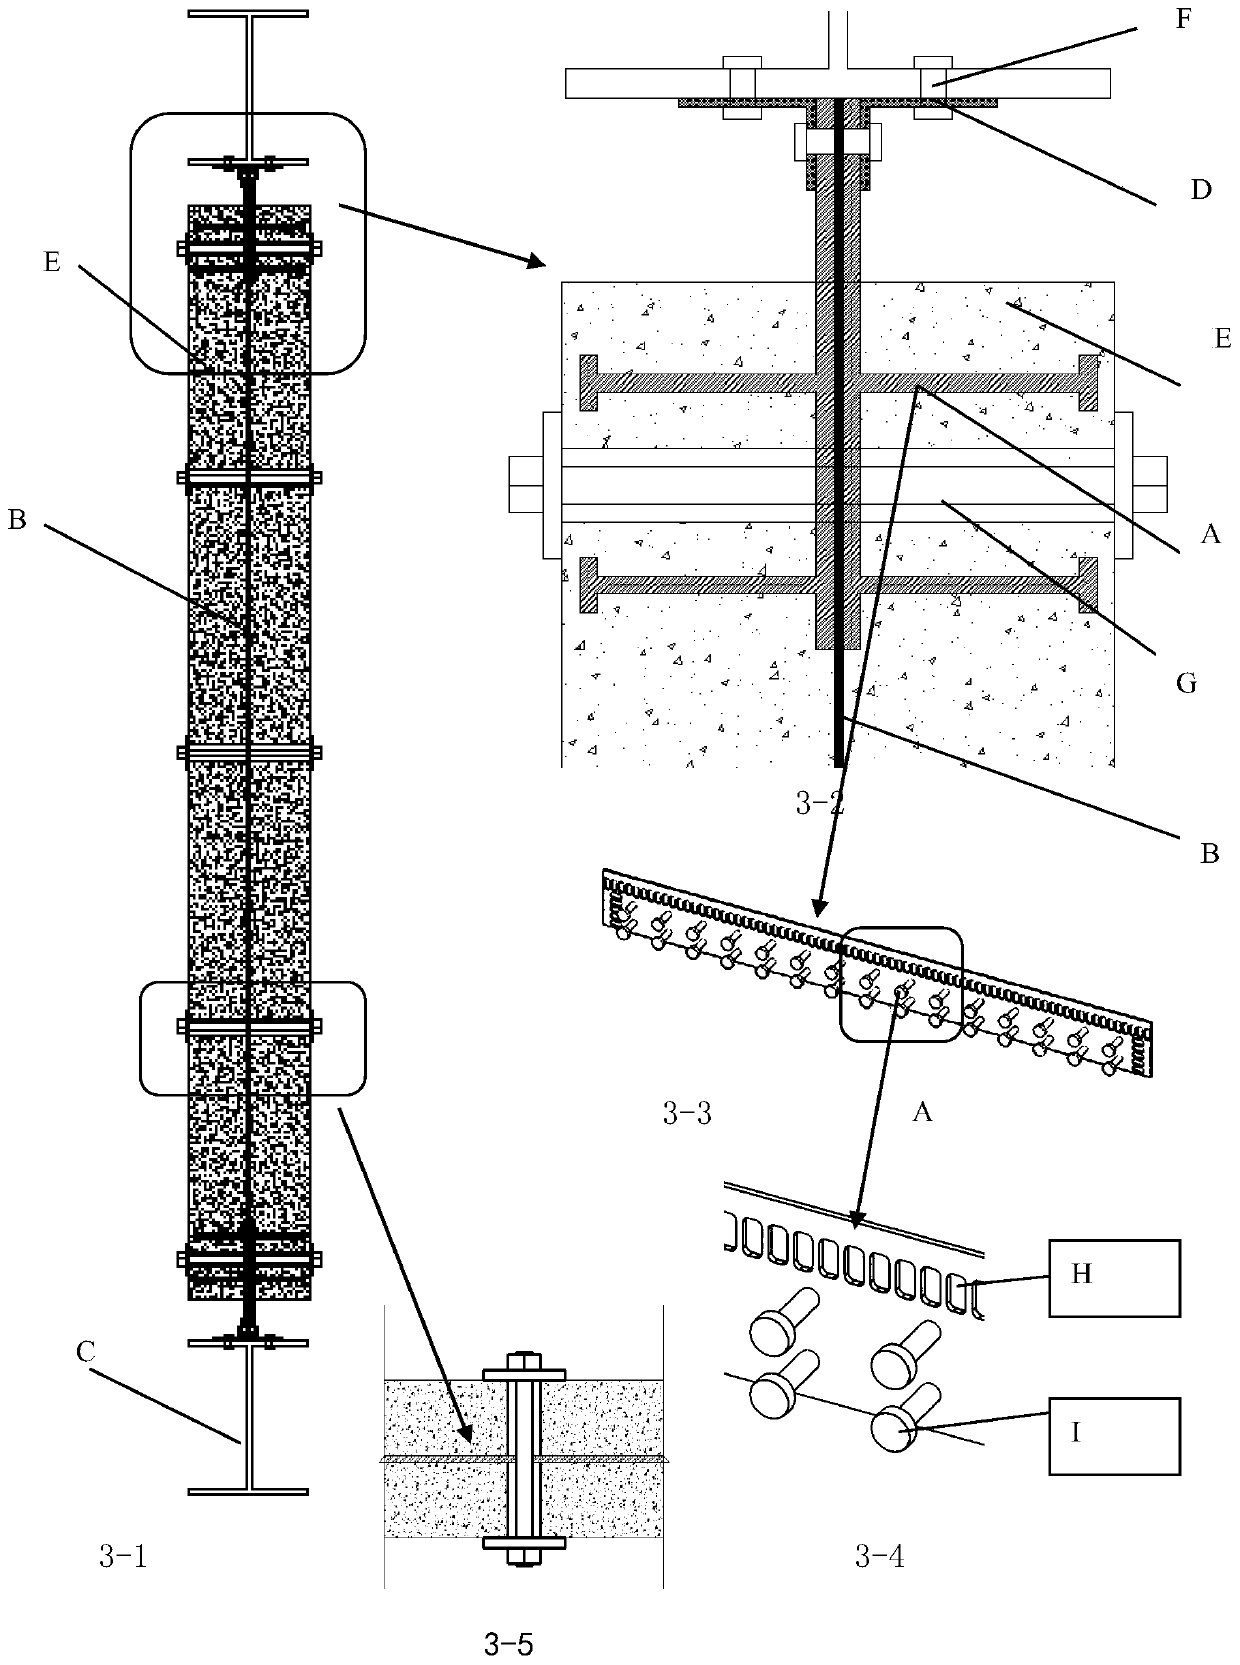 A prefabricated buckling-resistant steel plate shear wall considering both load bearing and energy dissipation